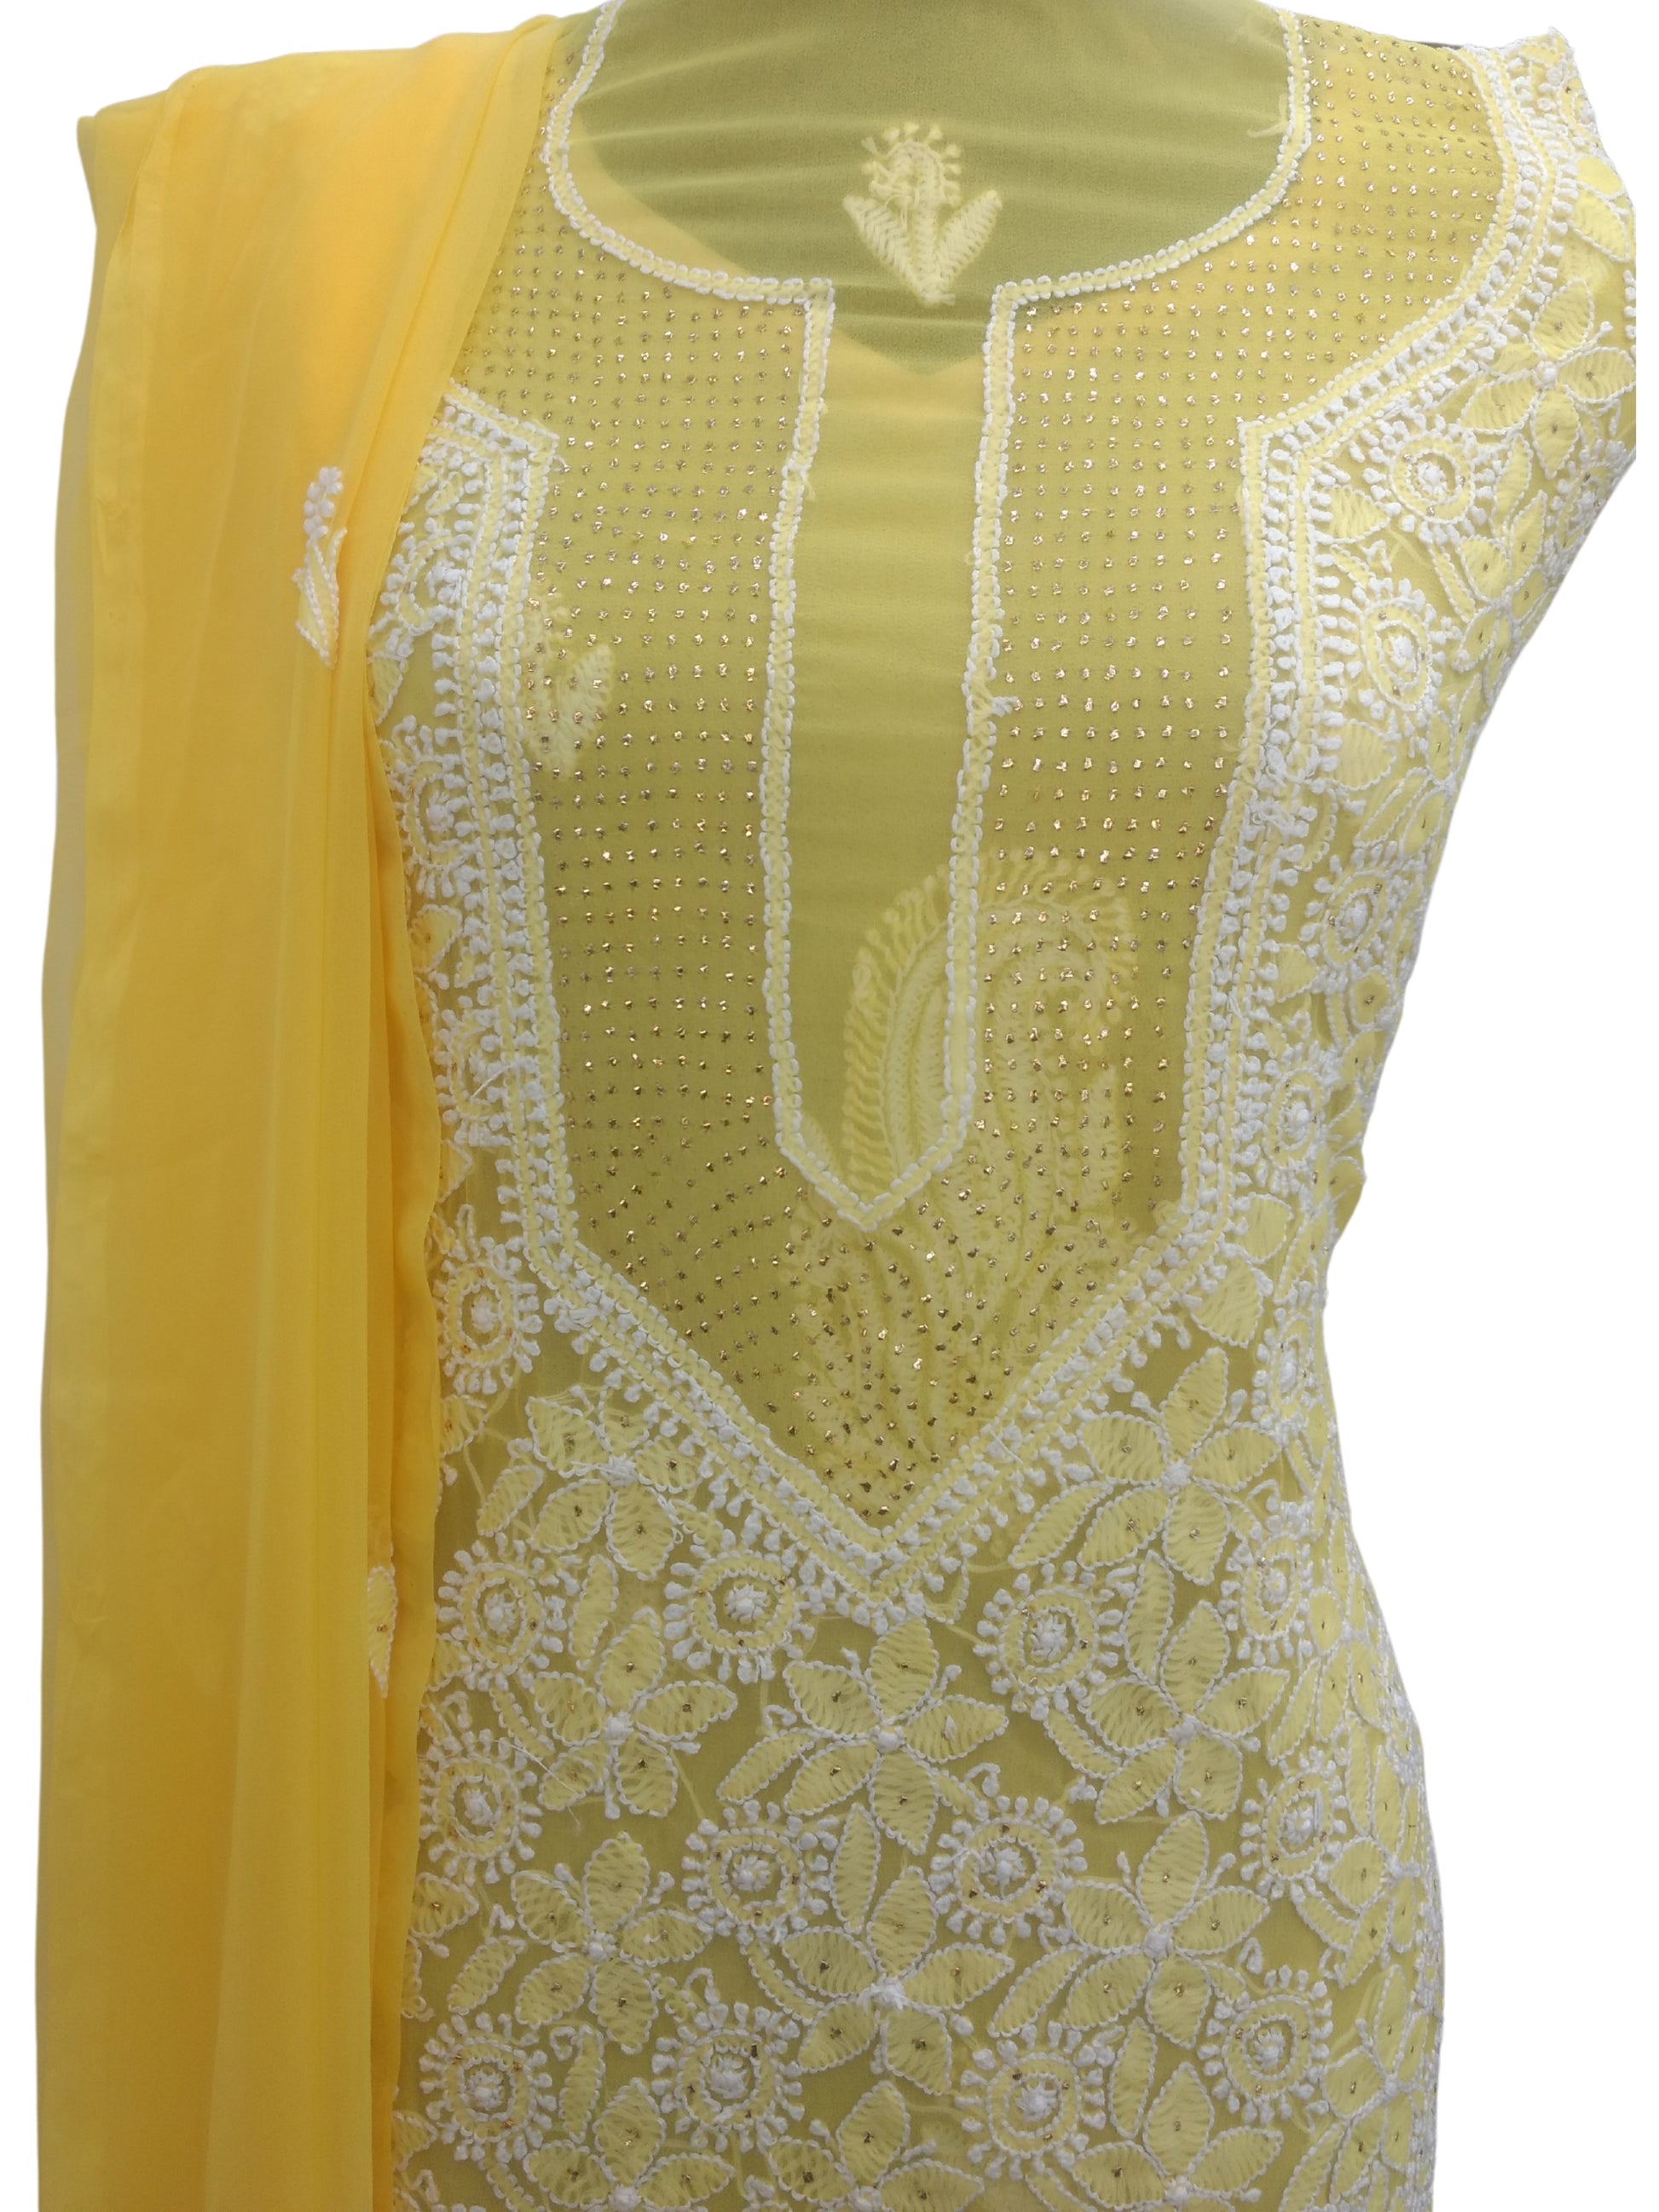 Shyamal Chikan Hand Embroidered Yellow Georgette Lucknowi Chikankari Unstitched Suit Piece With Mukaish Embellishment - S7653 - Shyamal Chikan